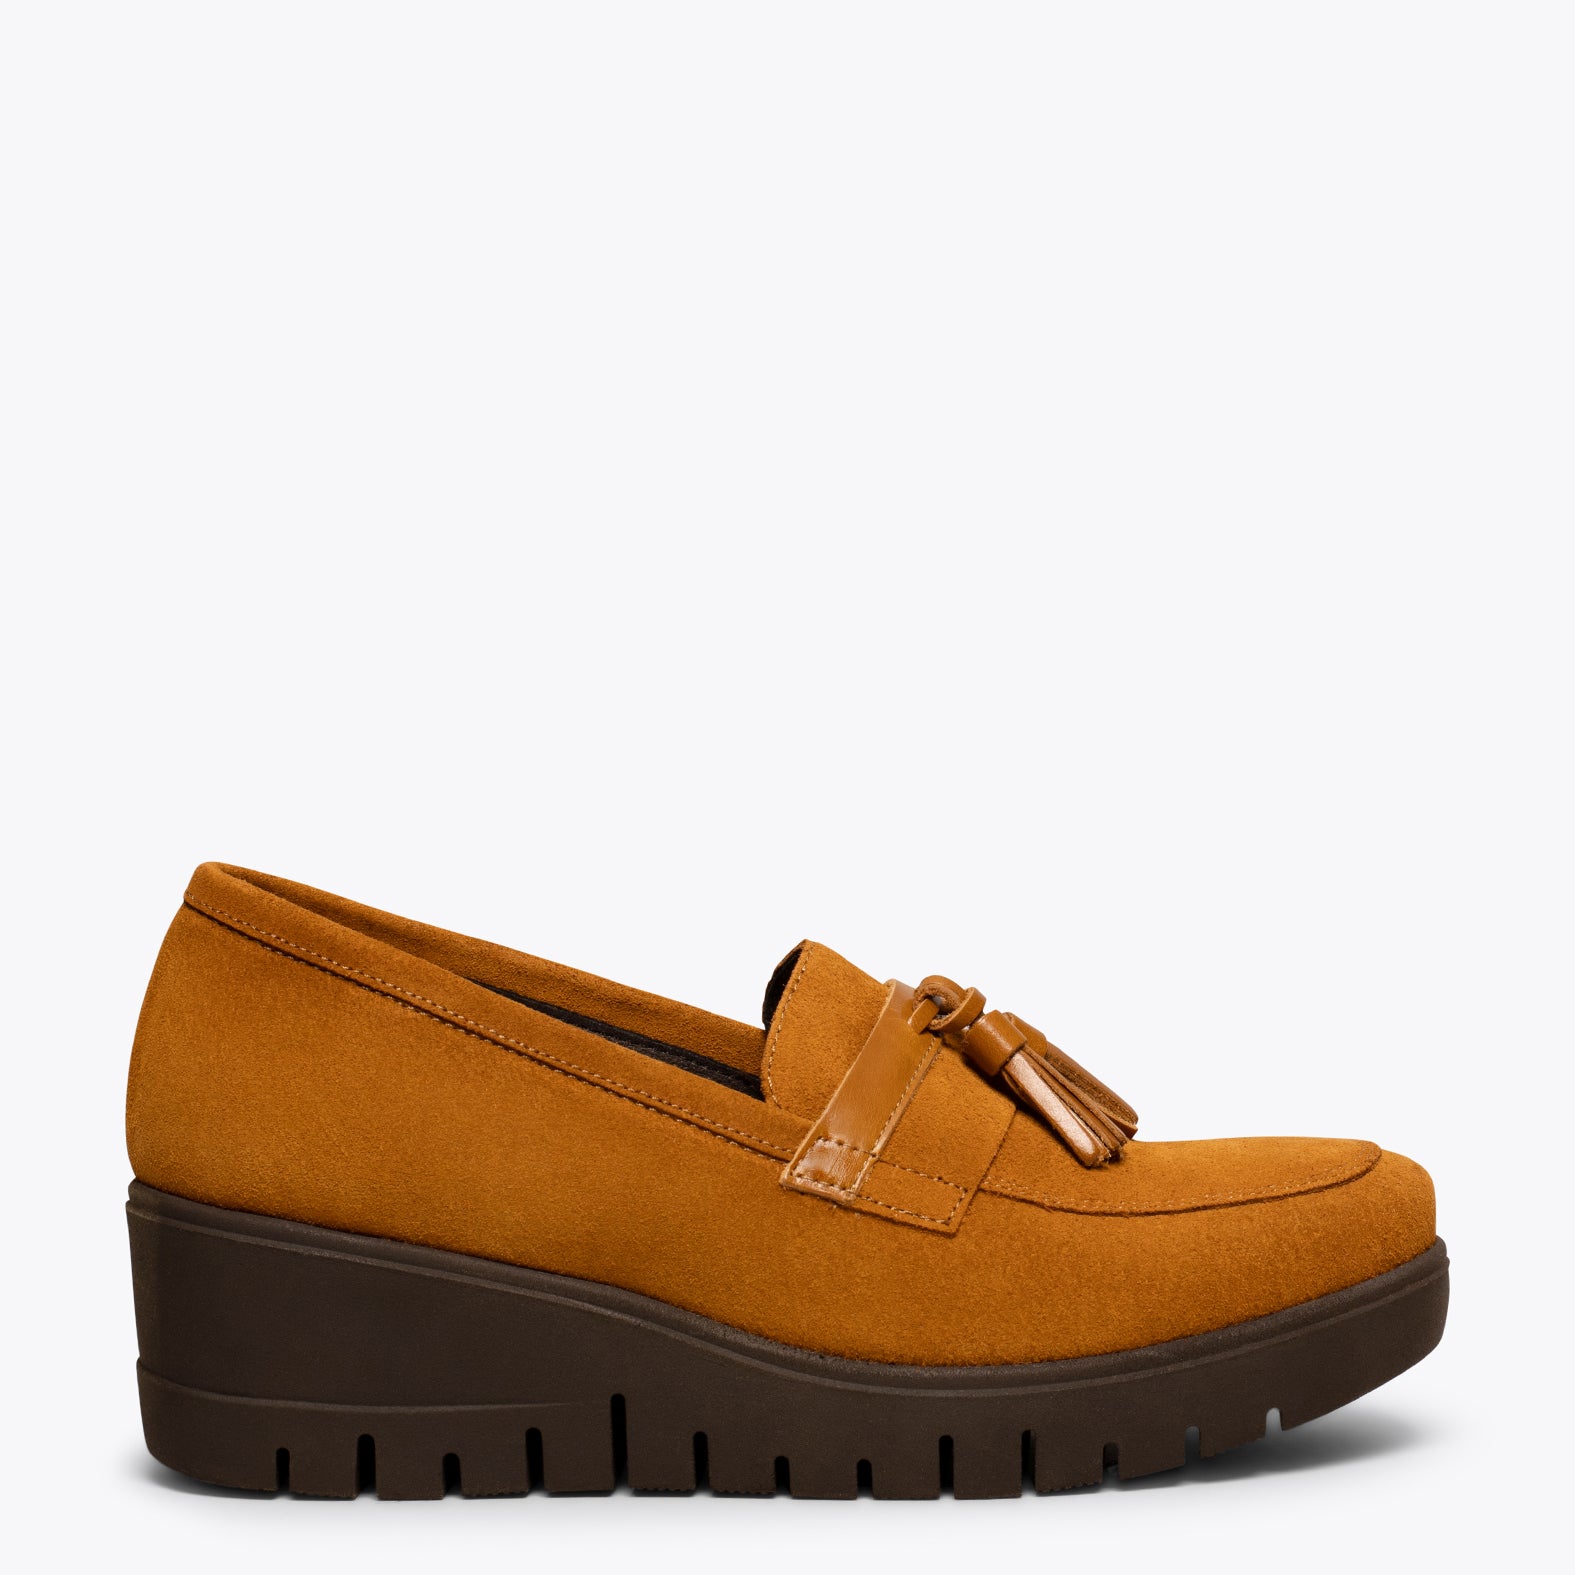 TASSEL - CAMEL moccasin with wedge and platform